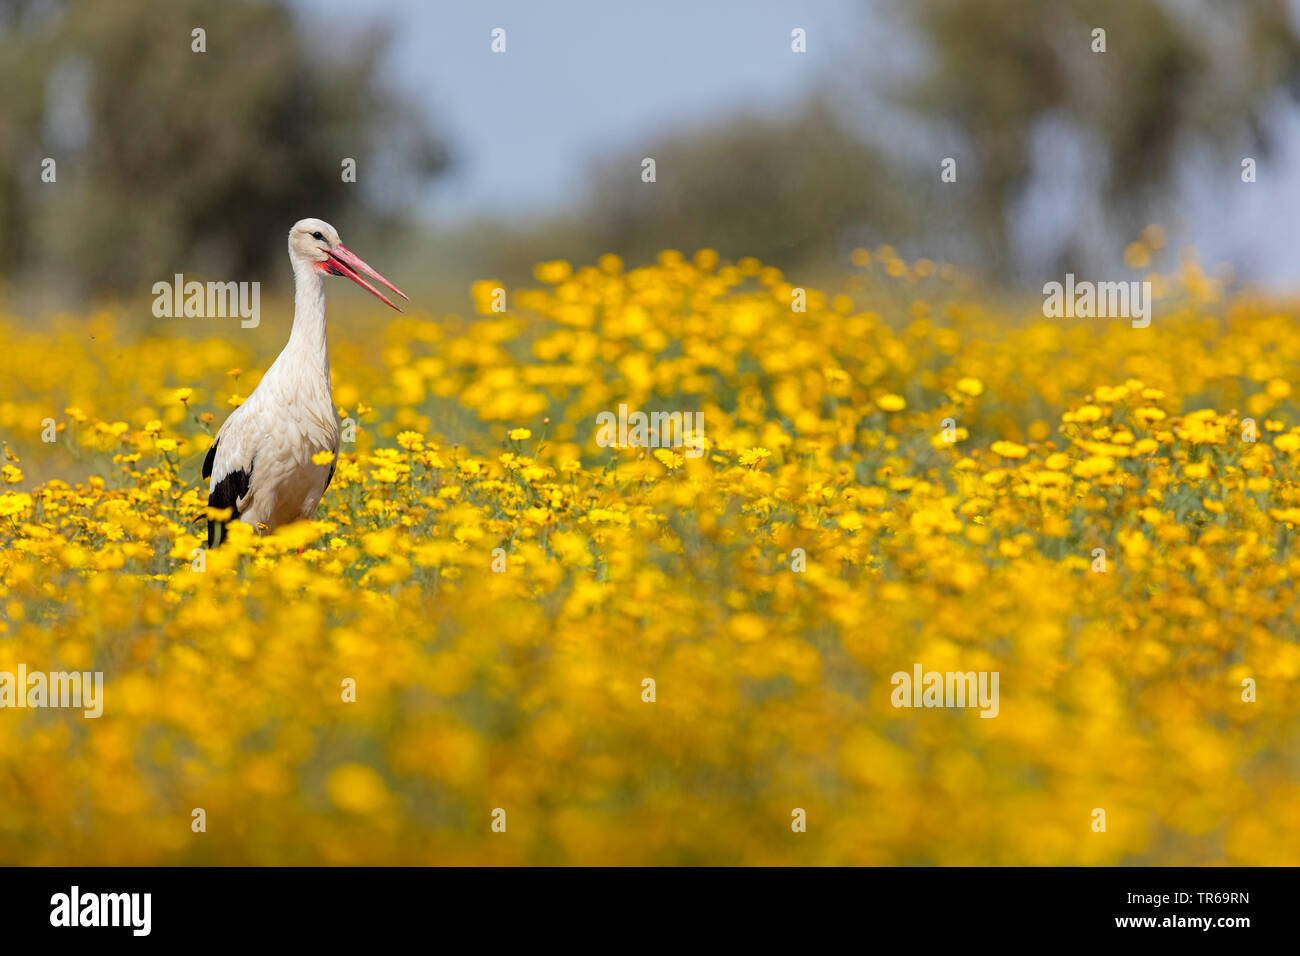 white stork (Ciconia ciconia), standing in a yellow flower carpet, Greece, Lesbos Stock Photo